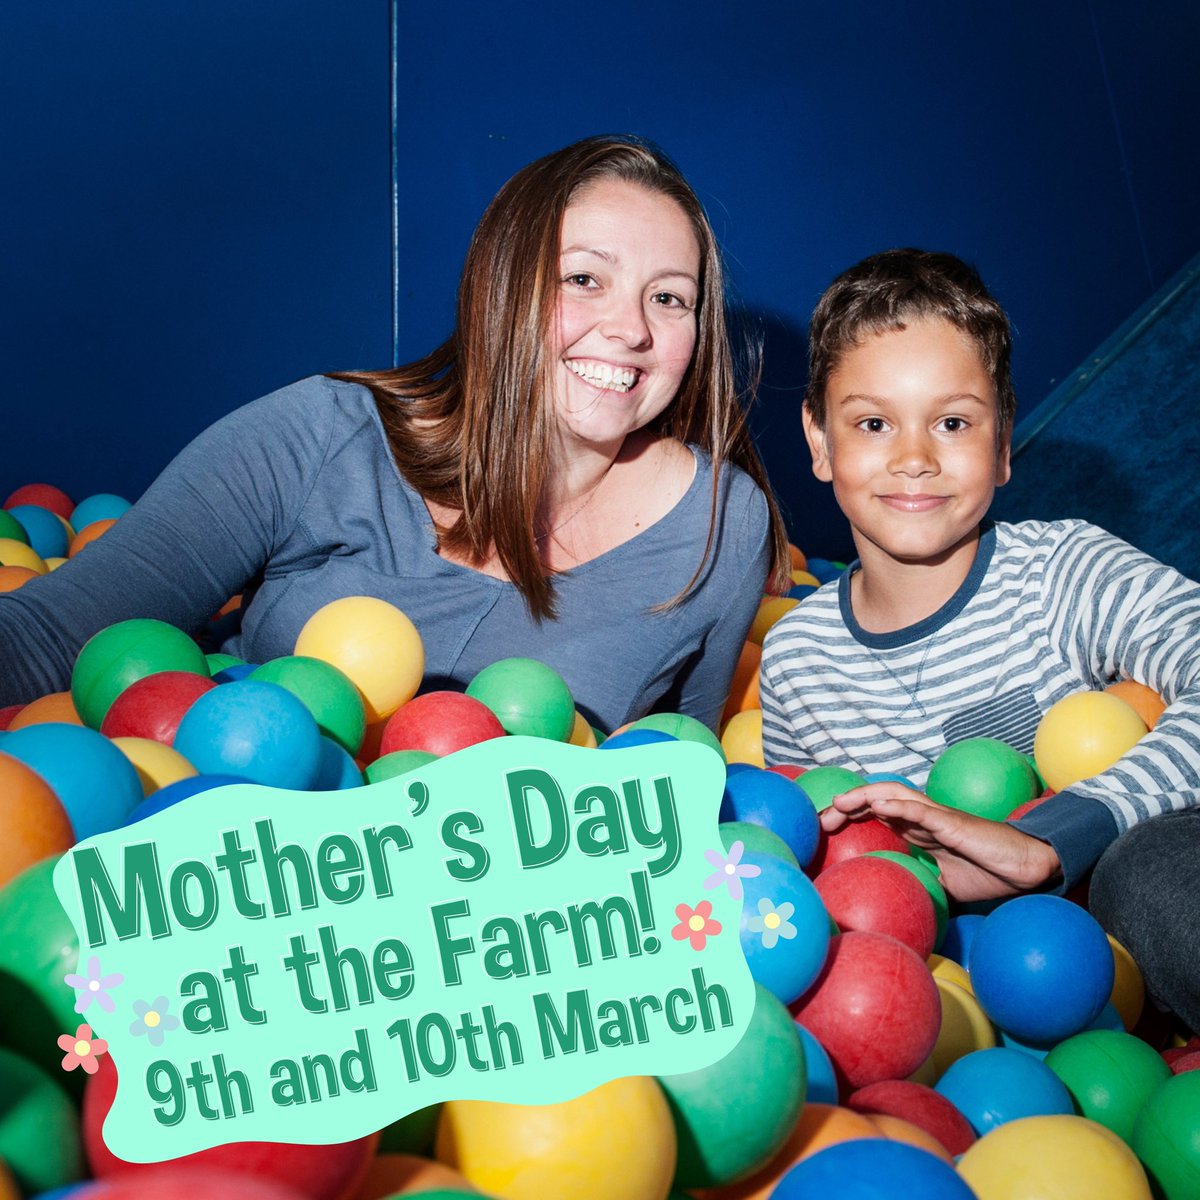 Mums go FREE on the 9th & 10th March! Celebrate #MothersDay at National Forest Adventure Farm 🌻🌿 Surprise Mum with an amazing day out! For one weekend only (9th – 10th March), mums can enjoy a complimentary visit to the Farm. That's right, MUM’S GO FREE when you book online!✨